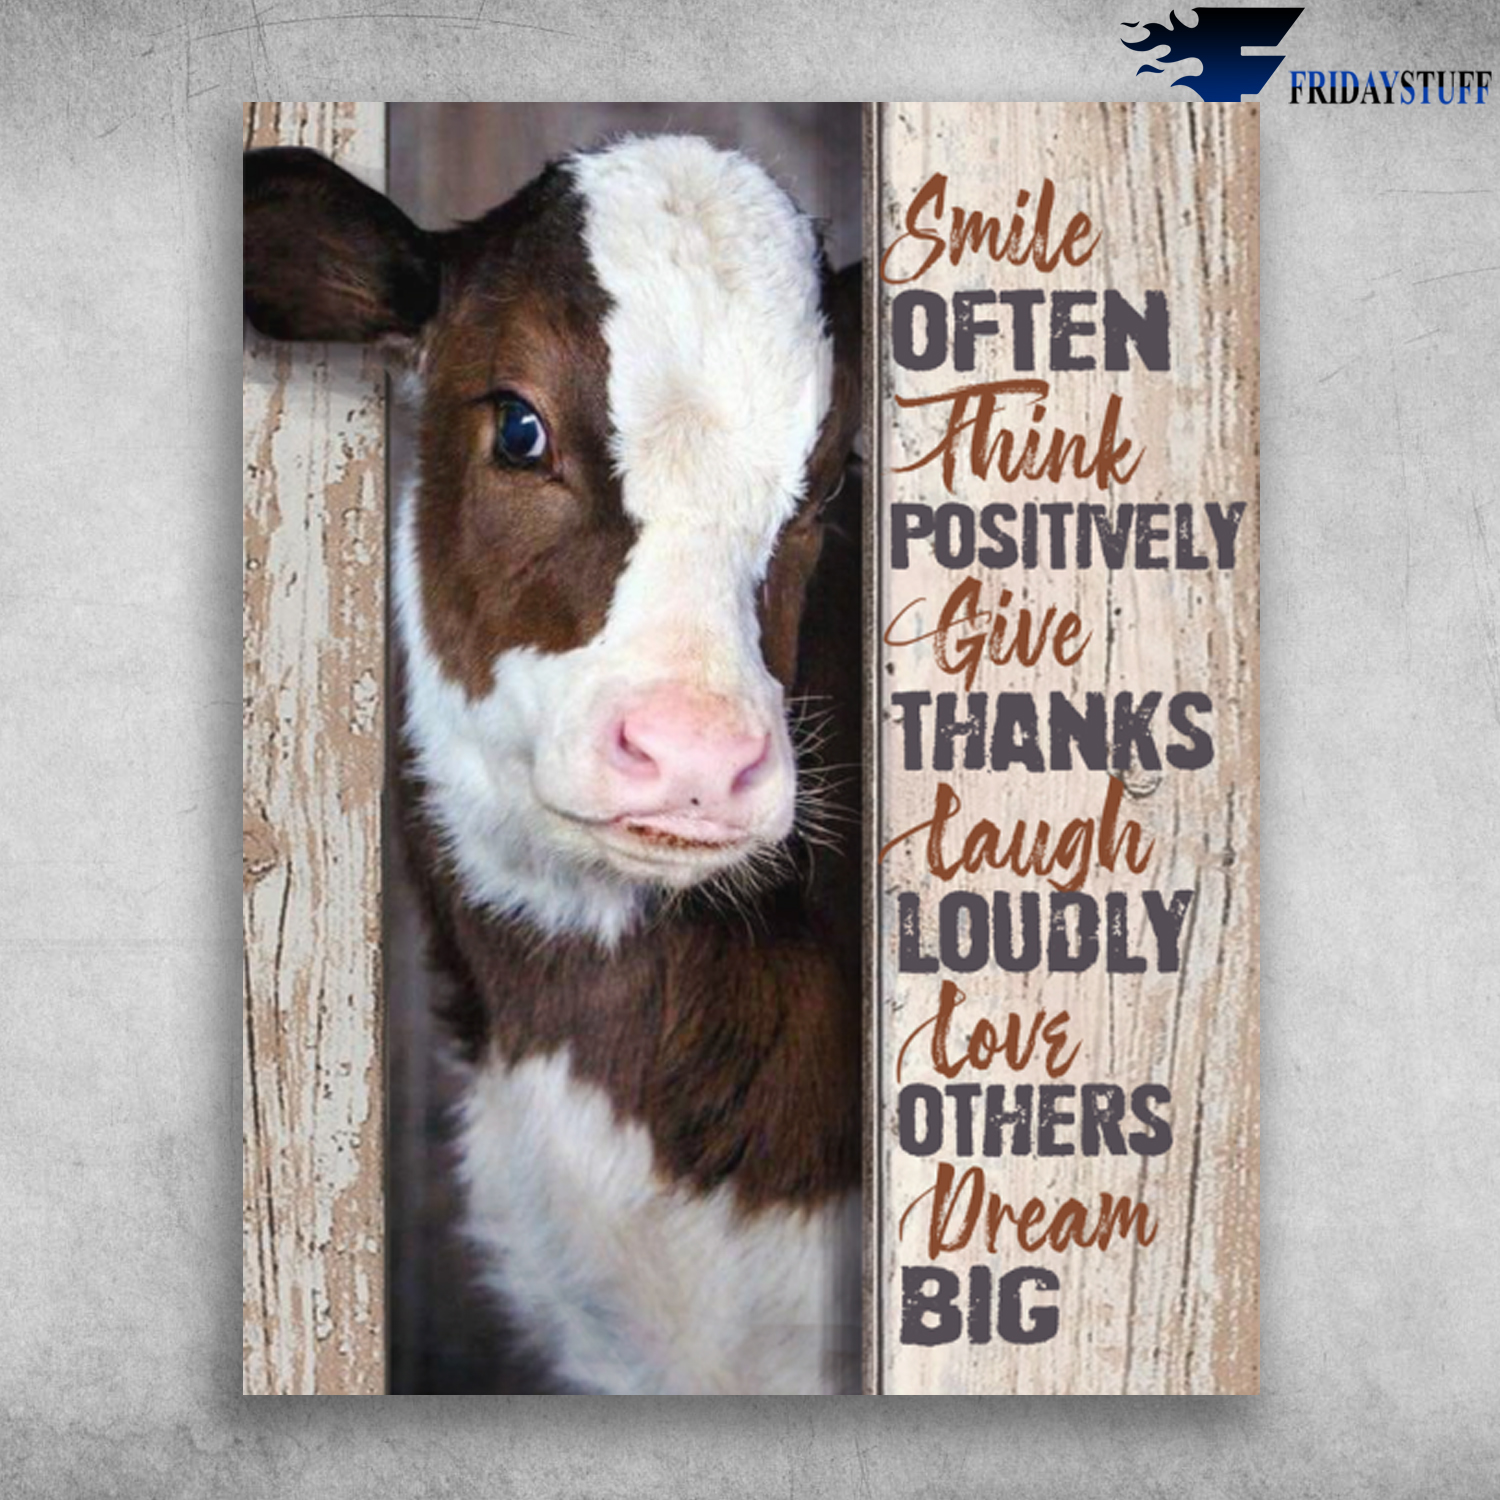 Cute Dairy Cattle Smile Often Think Positively Give Thanks Laugh Loudly